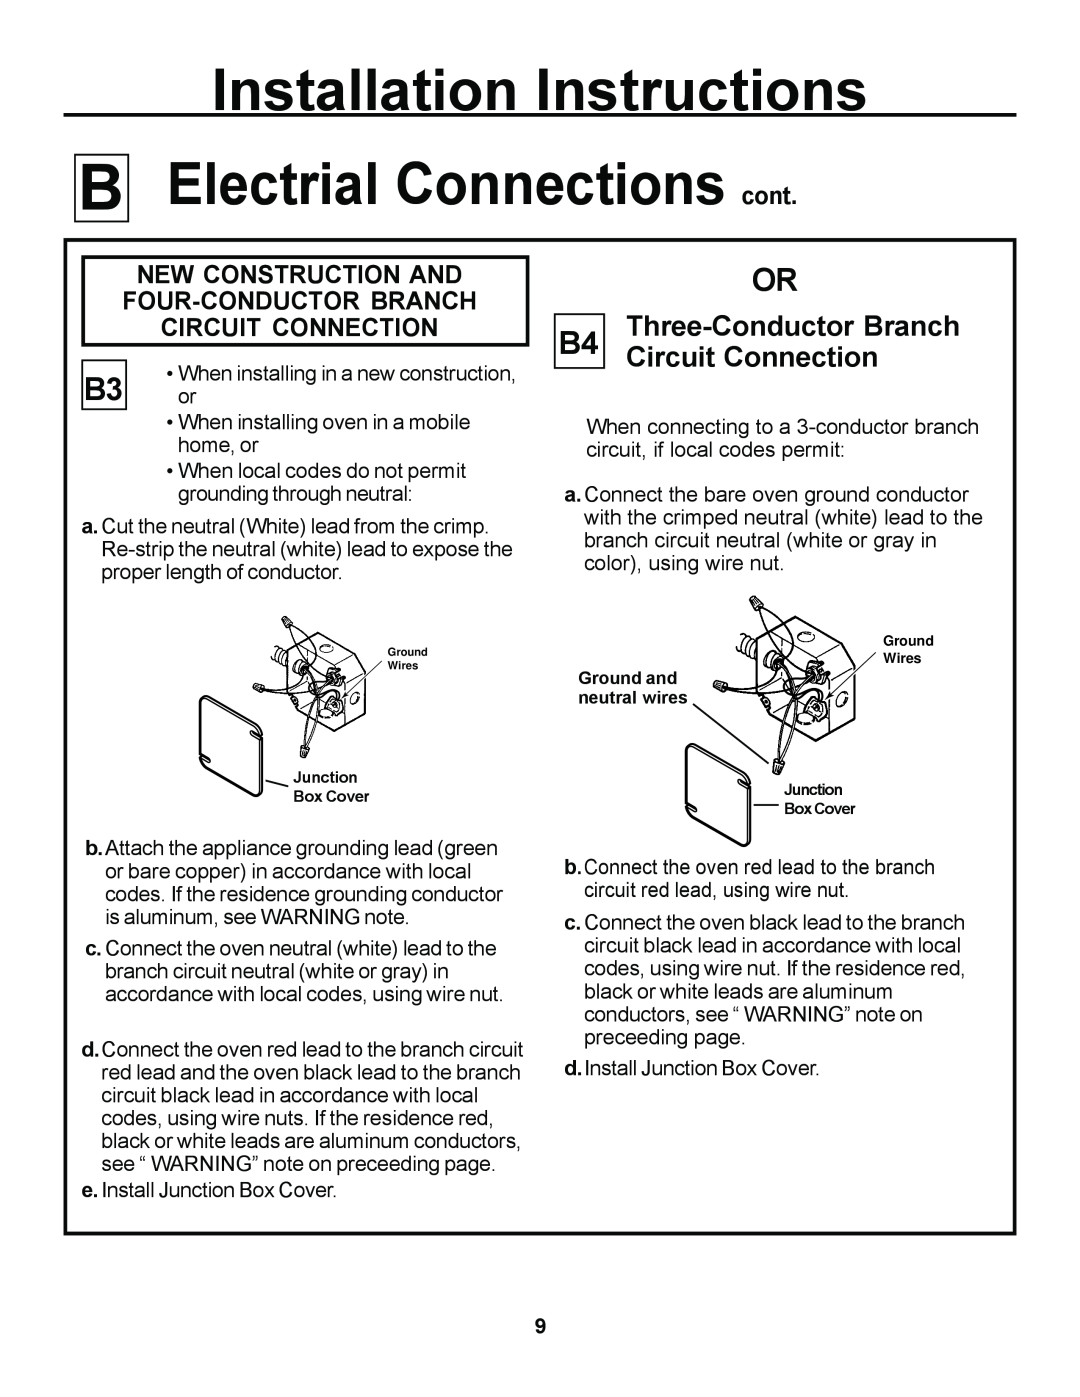 GE ZEK957, JKP27, JKS05 Electrial Connections cont, B4 Three-Conductor Branch Circuit Connection, Installation Instructions 